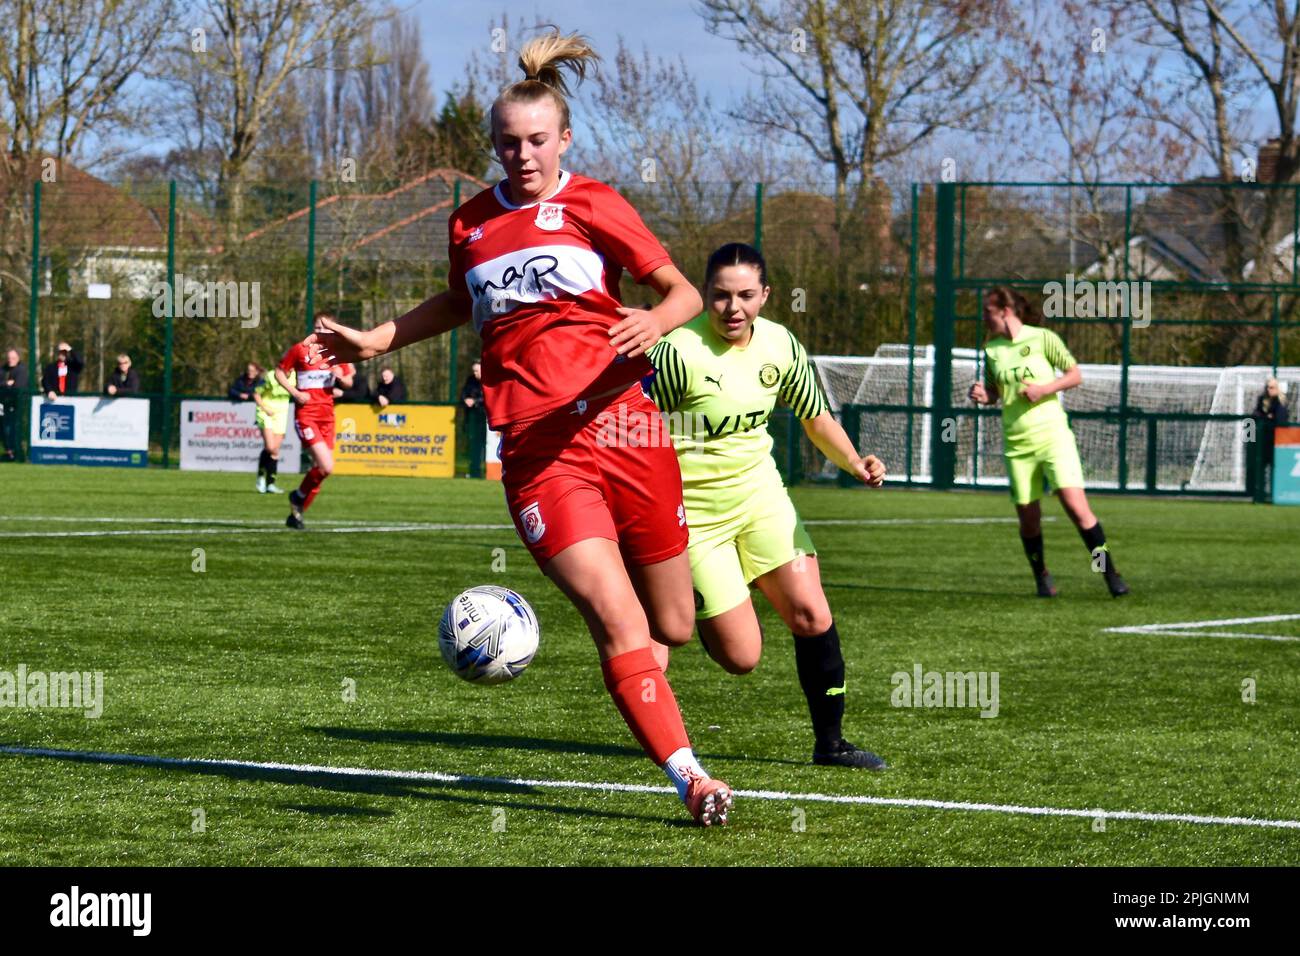 Teesside, UK. 02 Apr 2023. Jess Mett (Middlesbrough) in action as Middlesbrough Women FC (in red and white) played Stockport County Ladies FC in the FA Women’s National League Division One North. The visitors won 1-6 at the Map Group UK Stadium in Stockton-on-Tees - a scoreline which was harsh on the home side. Credit: Teesside Snapper/Alamy Live News Stock Photo